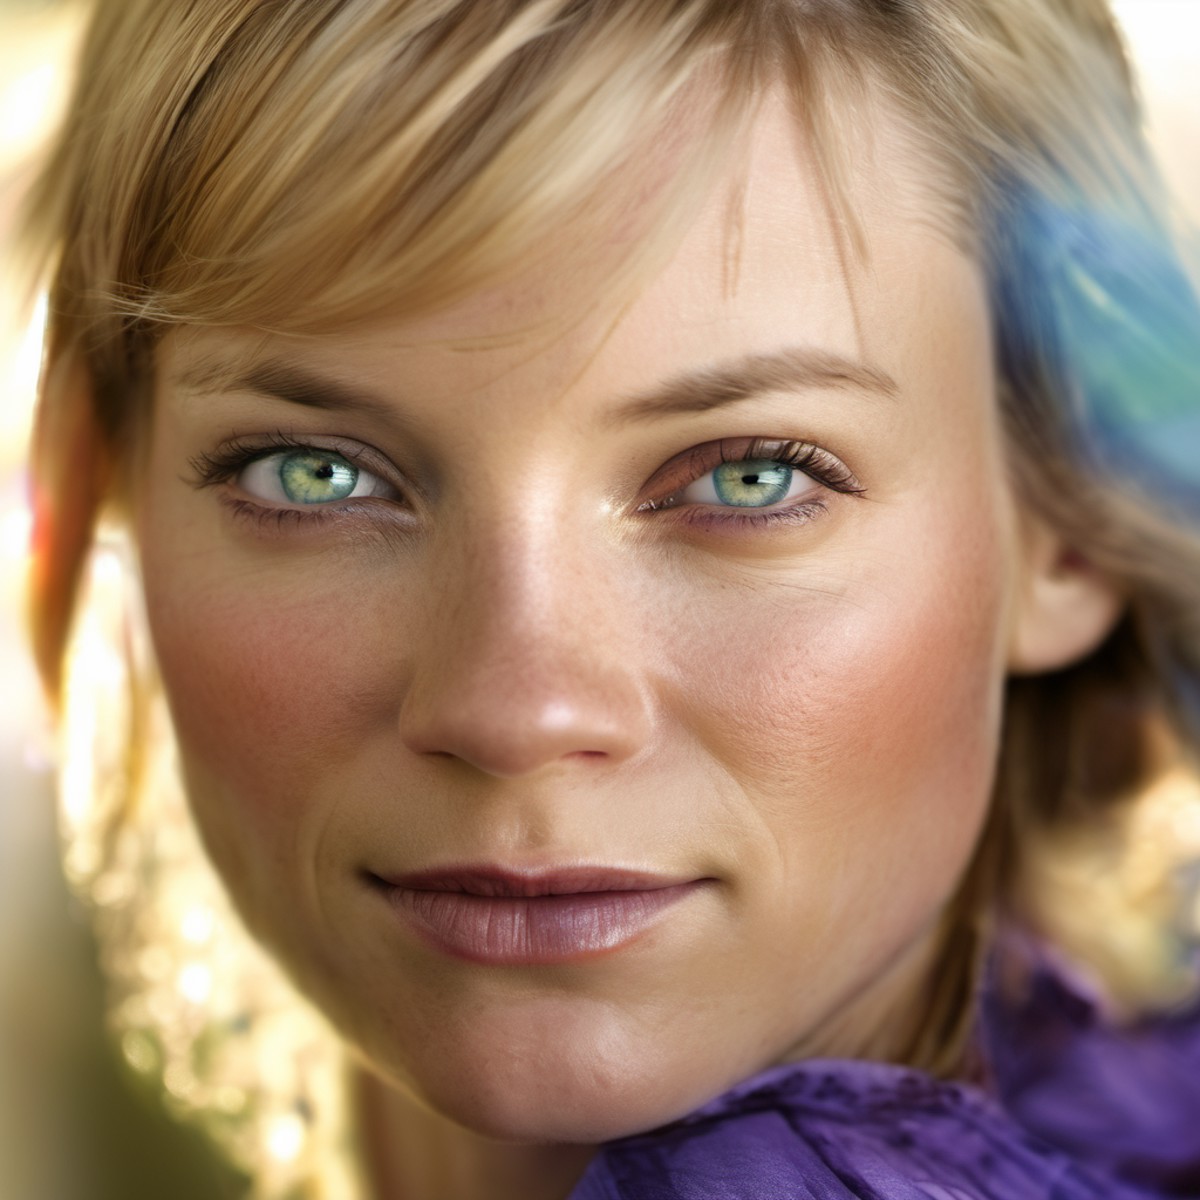 amysmart a beautiful woman A captivating close up portrait of a woman's face, as the iris is captured with a fast shutter ...